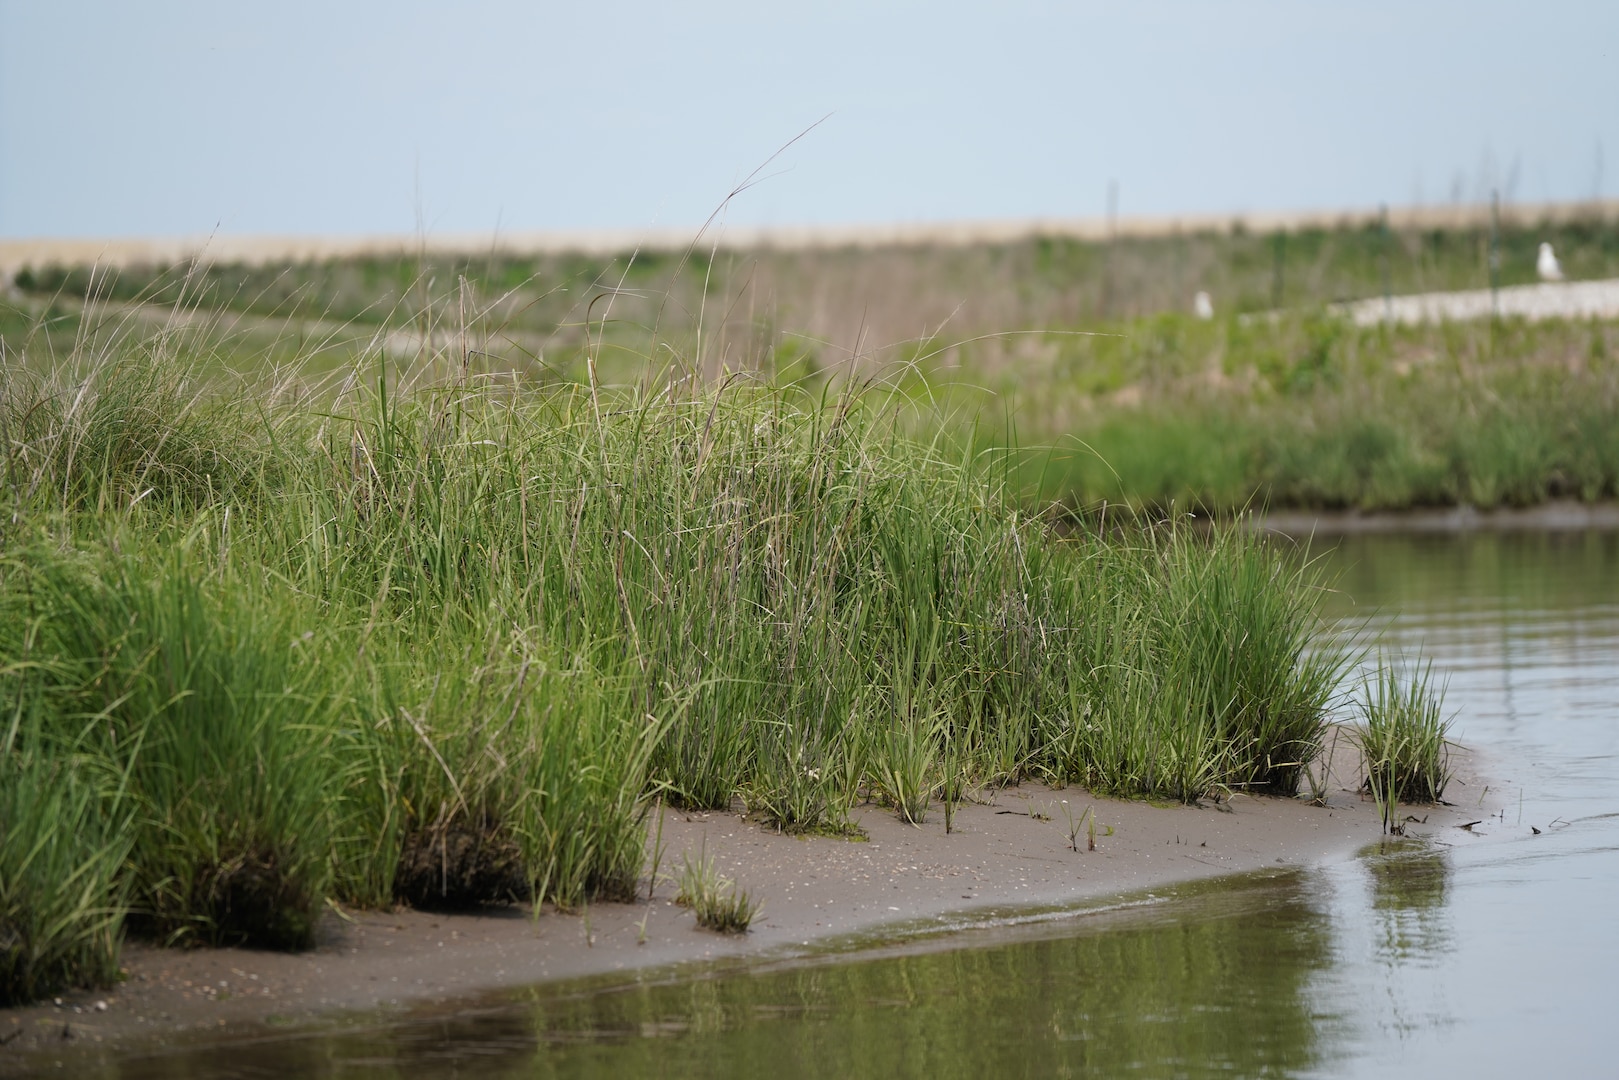 Planted marsh grasses thrive within a containment cell at Poplar Island May 22, 2019.